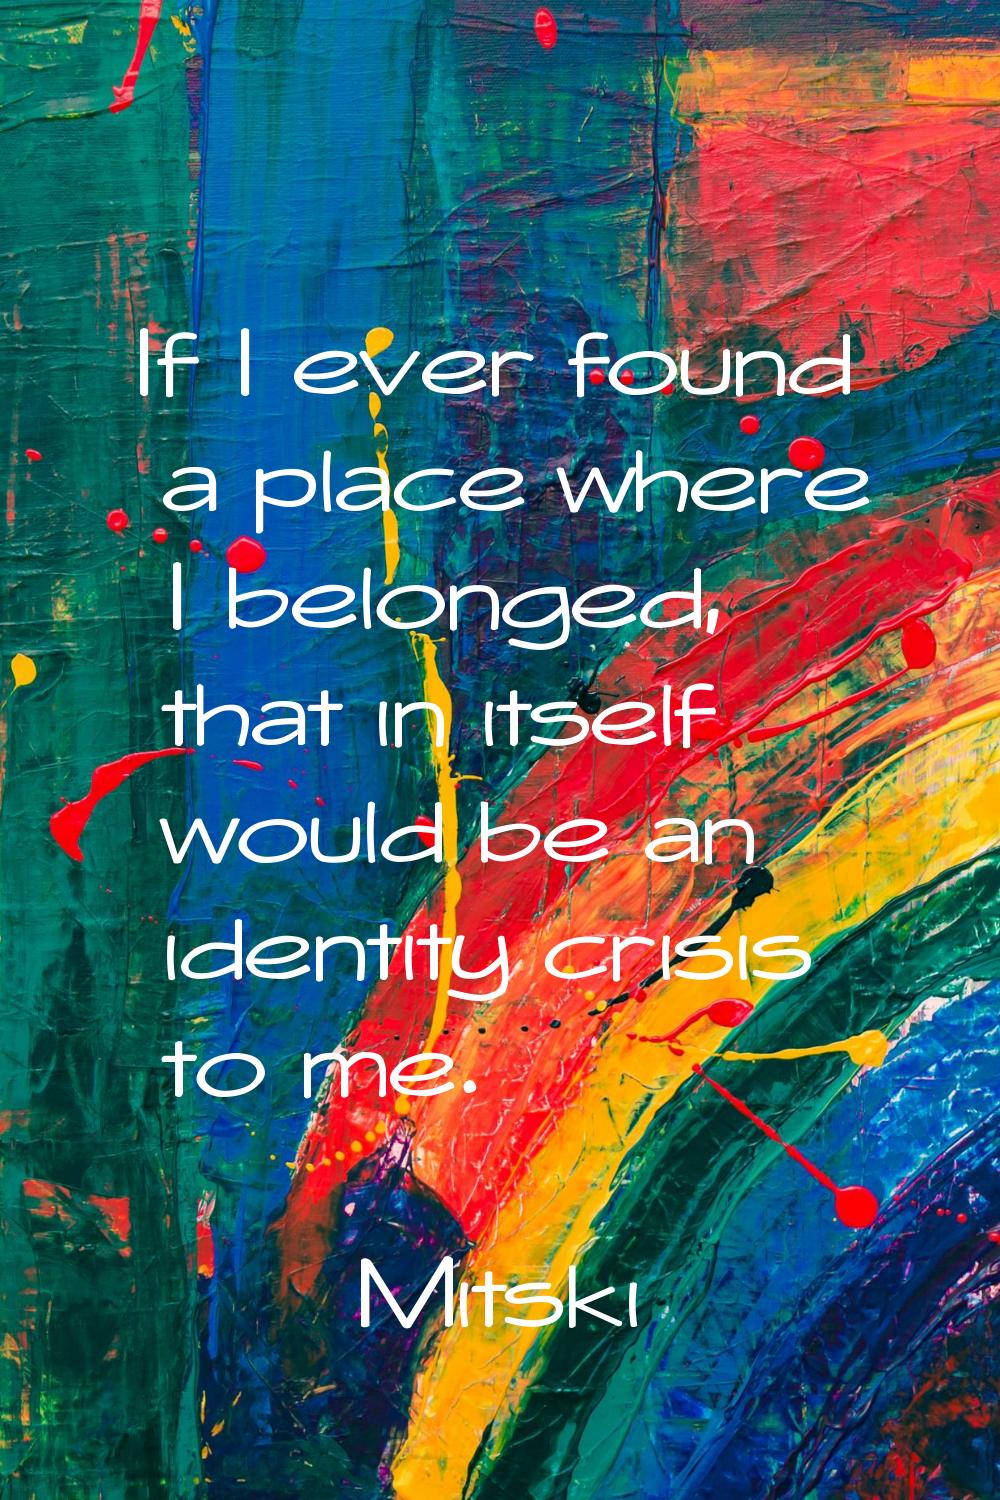 If I ever found a place where I belonged, that in itself would be an identity crisis to me.